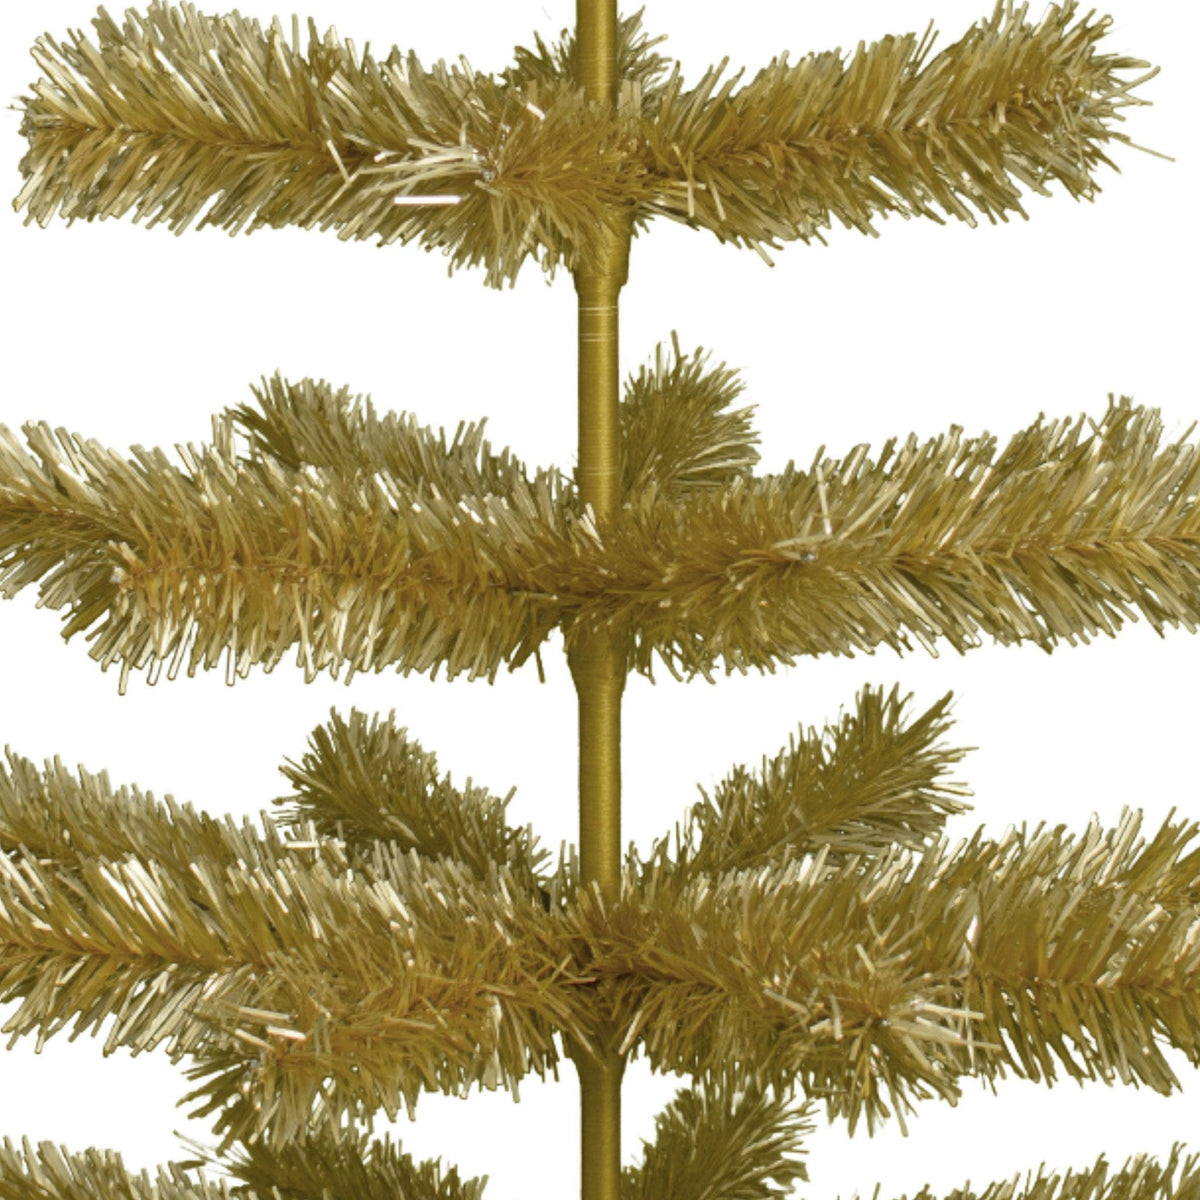 Our 48in Tall Antique Gold Christmas Tree.  Celebrate Lee Display's 120th Anniversary with our brand new Antique Gold colored tinsel Christmas Trees.  Shop for antique gold christmas trees at leedisplay.com